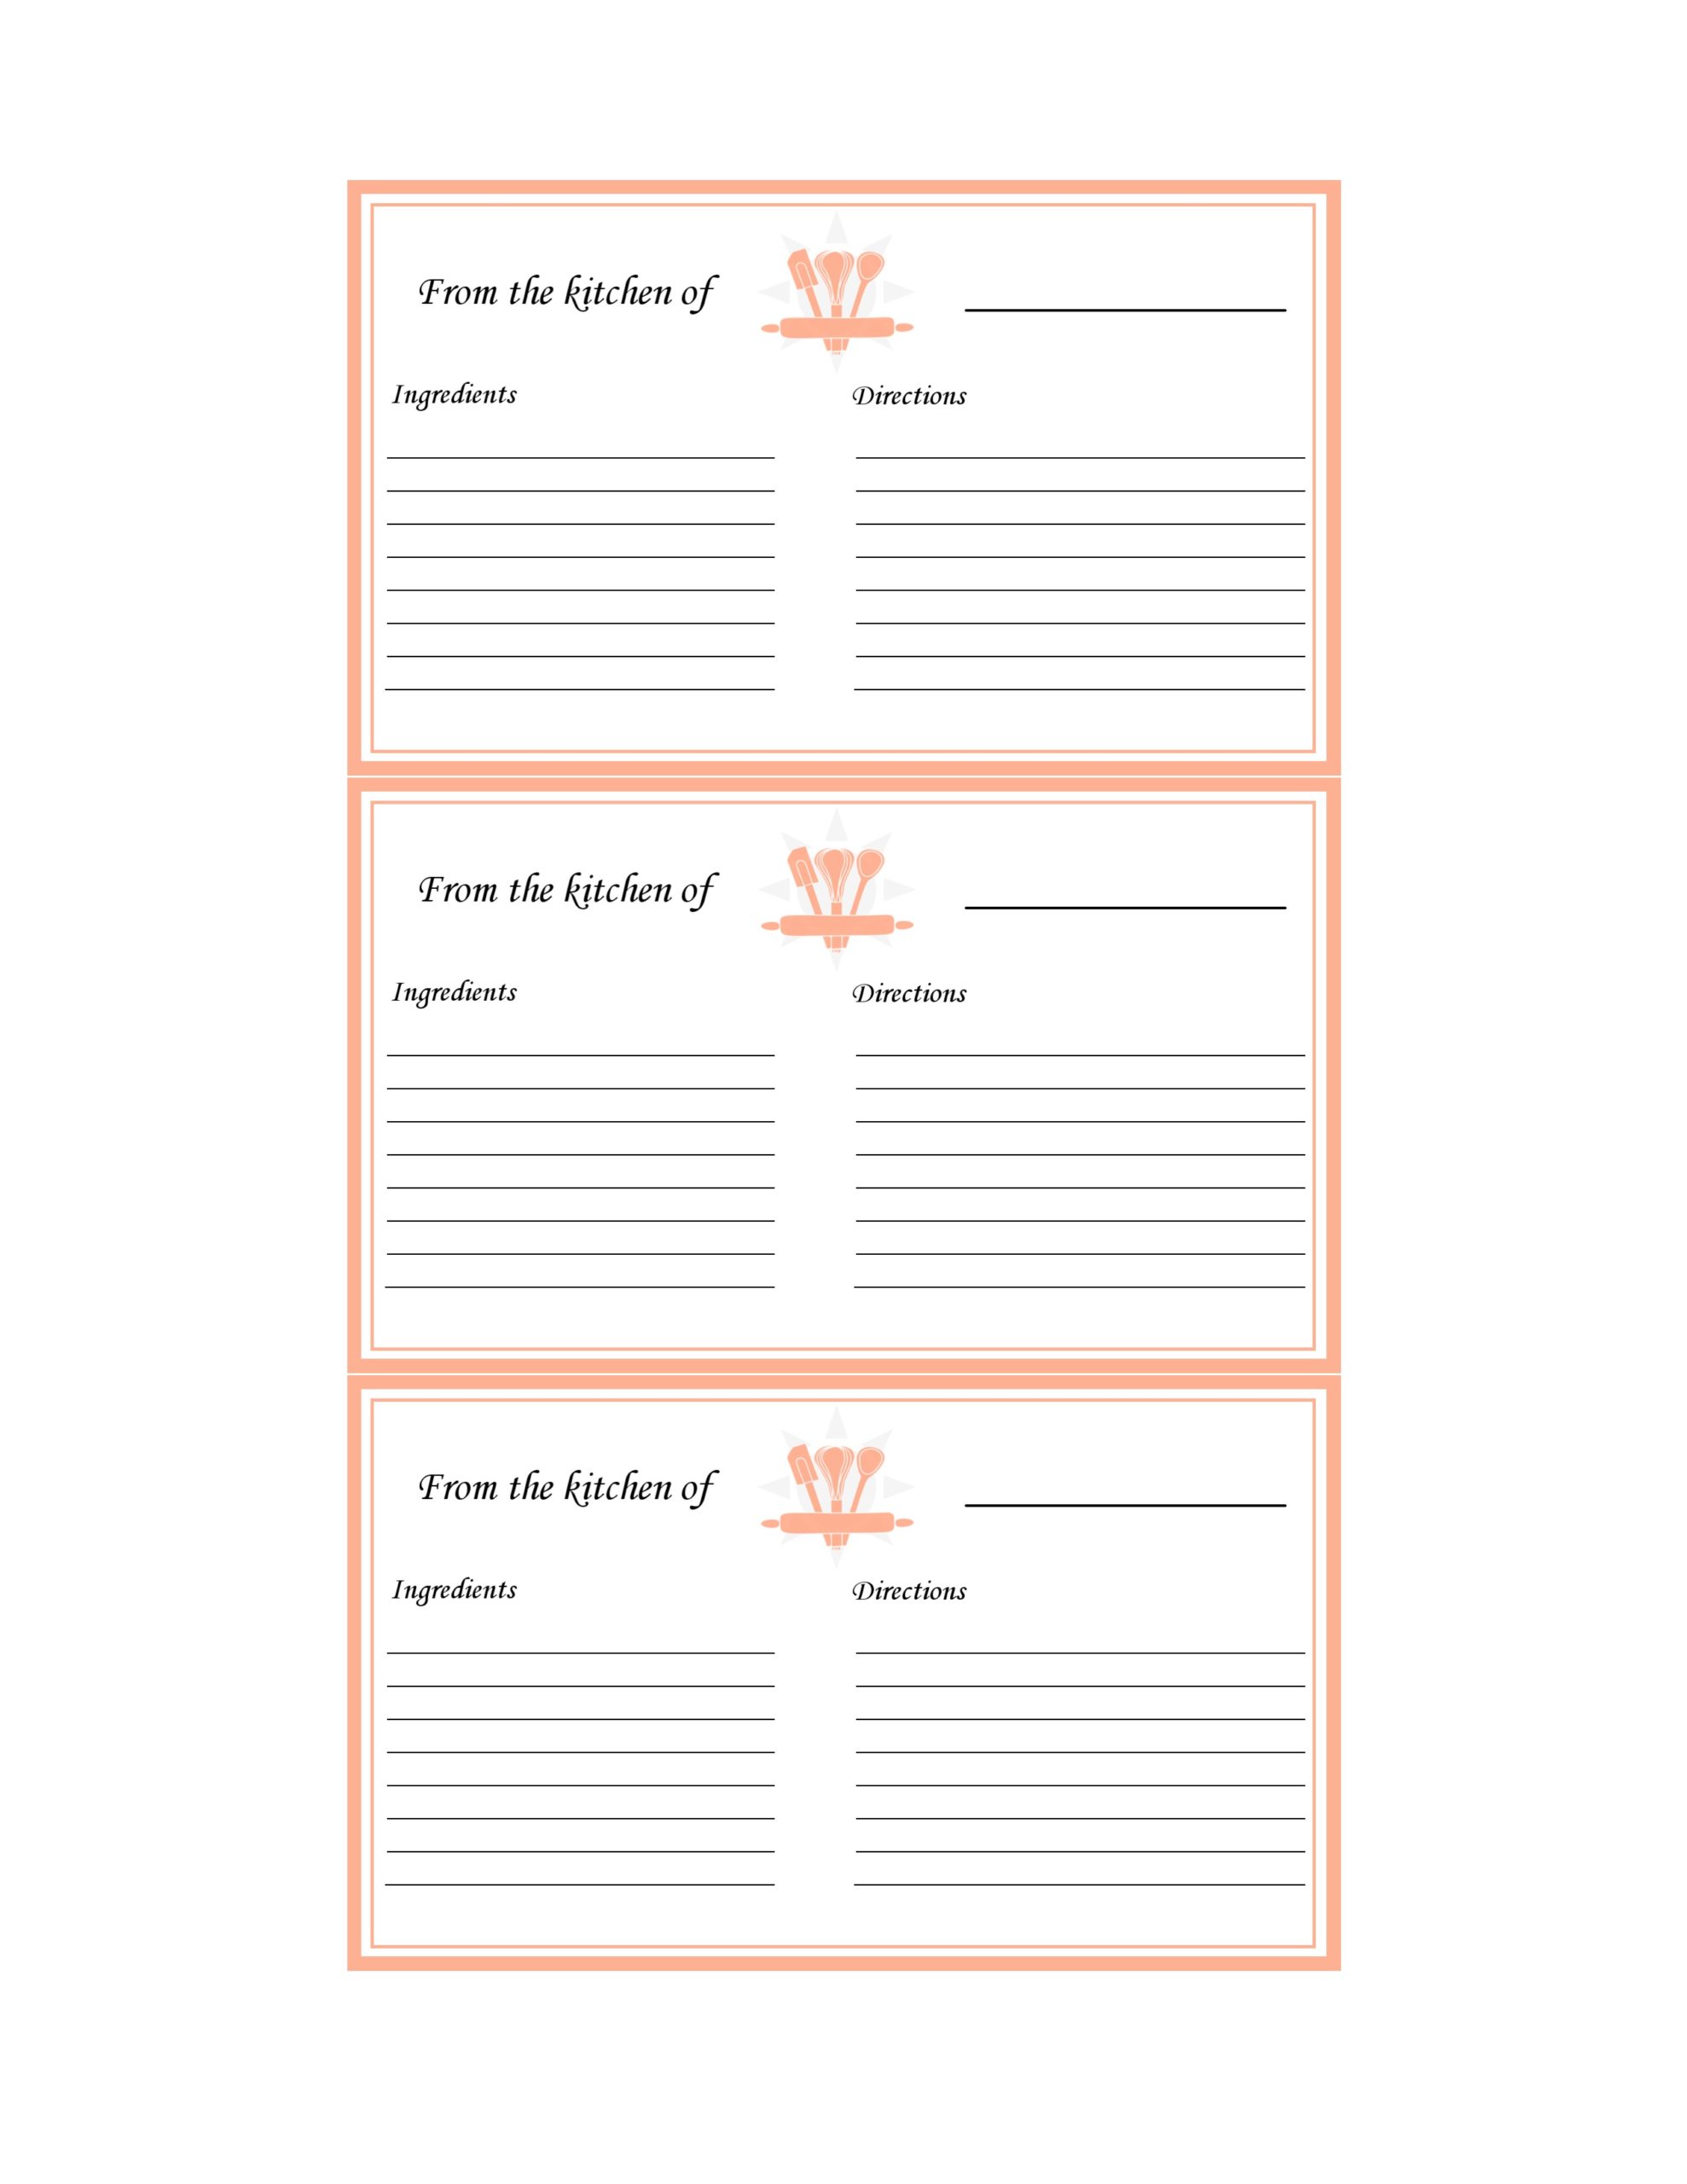 20 Free Recipe Card Templates (Word, Google Docs) - TemplateArchive Pertaining To Index Card Template Google Docs